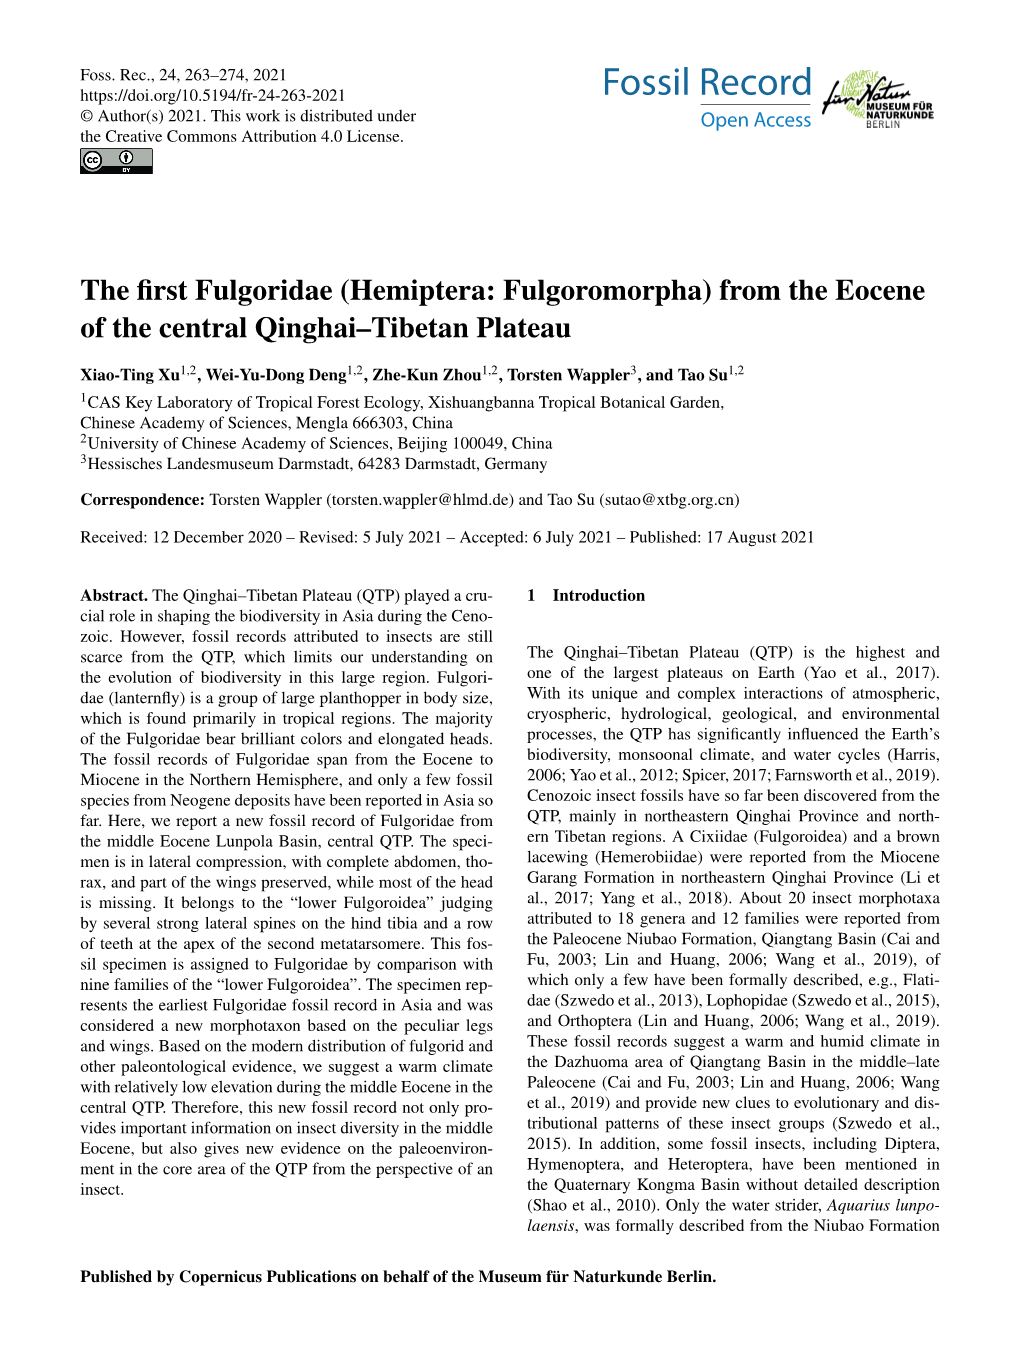 From the Eocene of the Central Qinghai–Tibetan Plateau